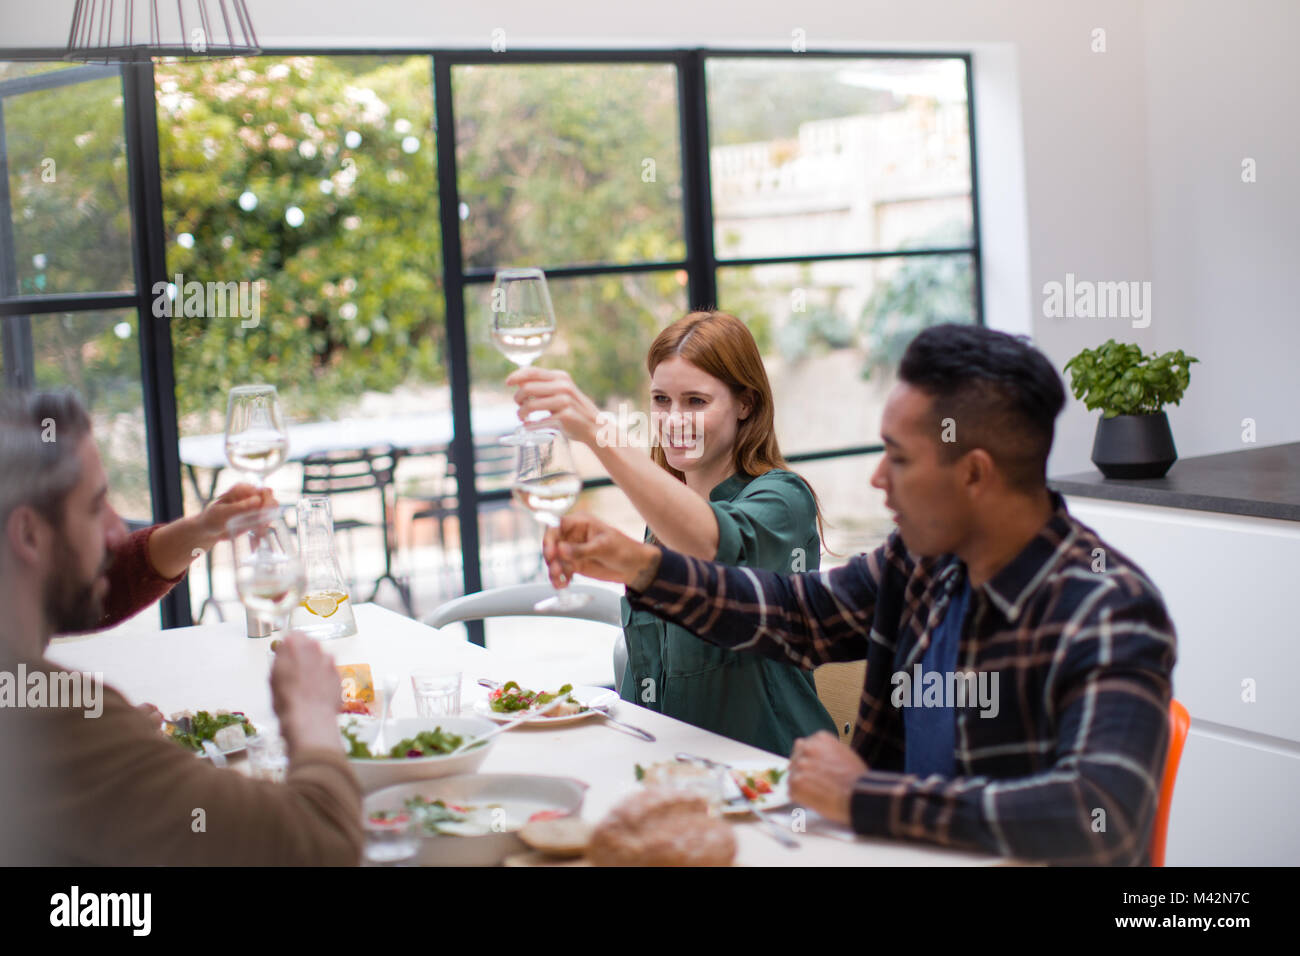 Friends clinking glasses over a meal together Stock Photo